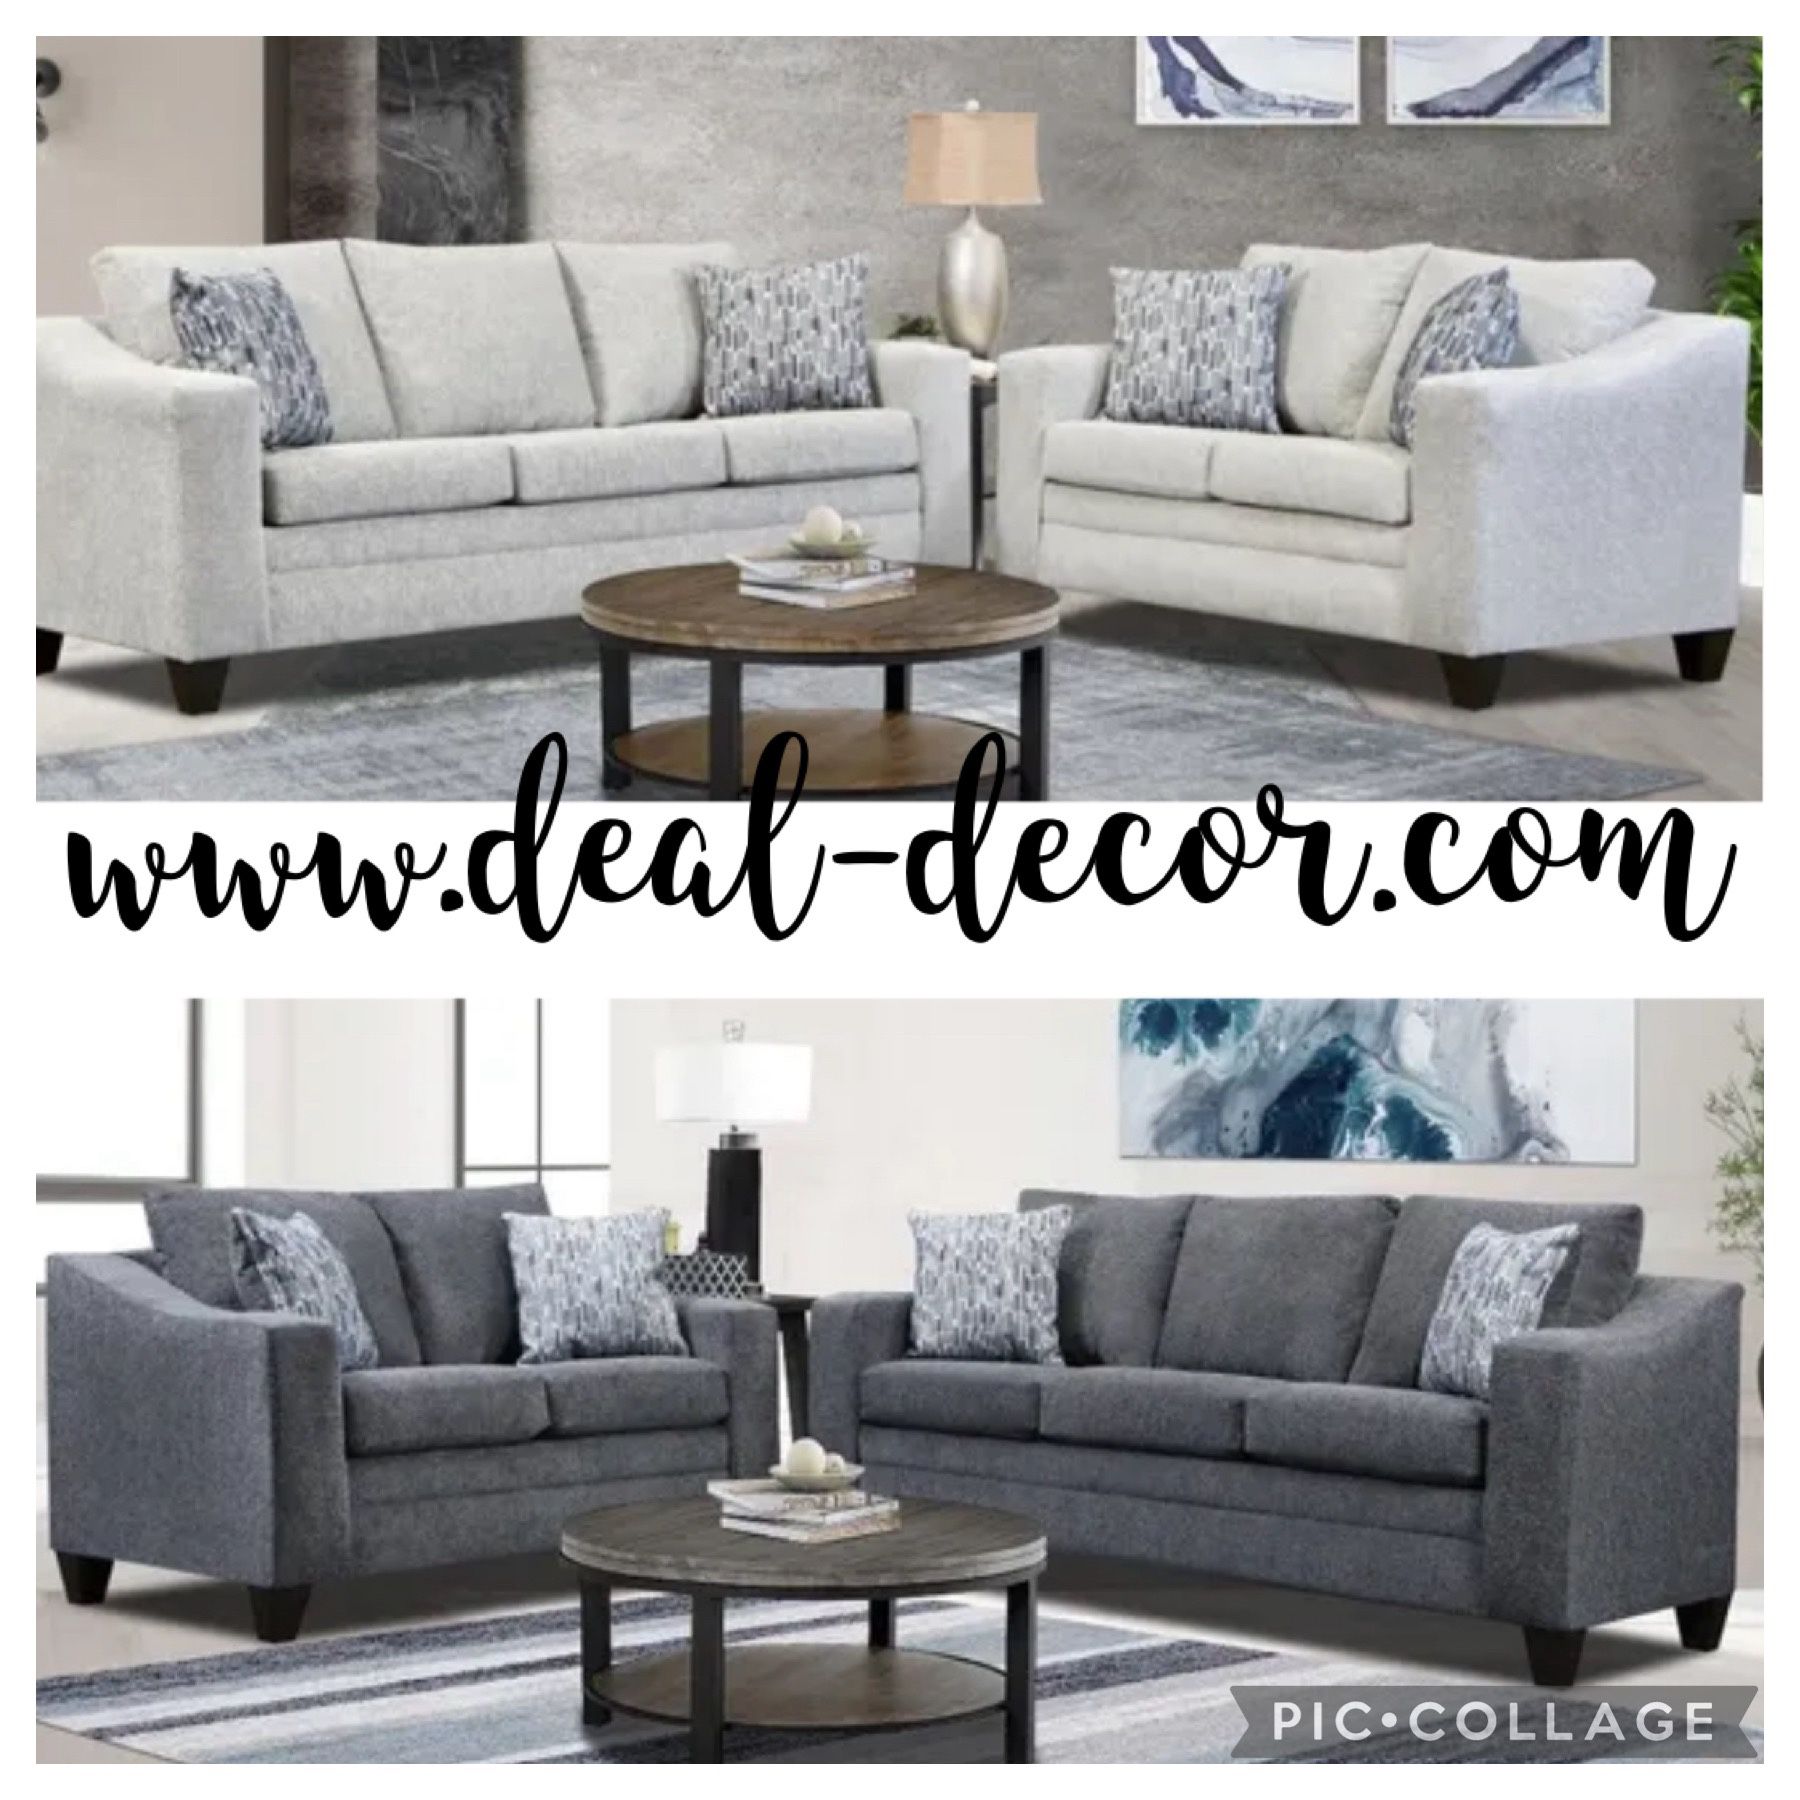 New 2pc Off-white Or Gray Sofa And Loveseat With Pillows 